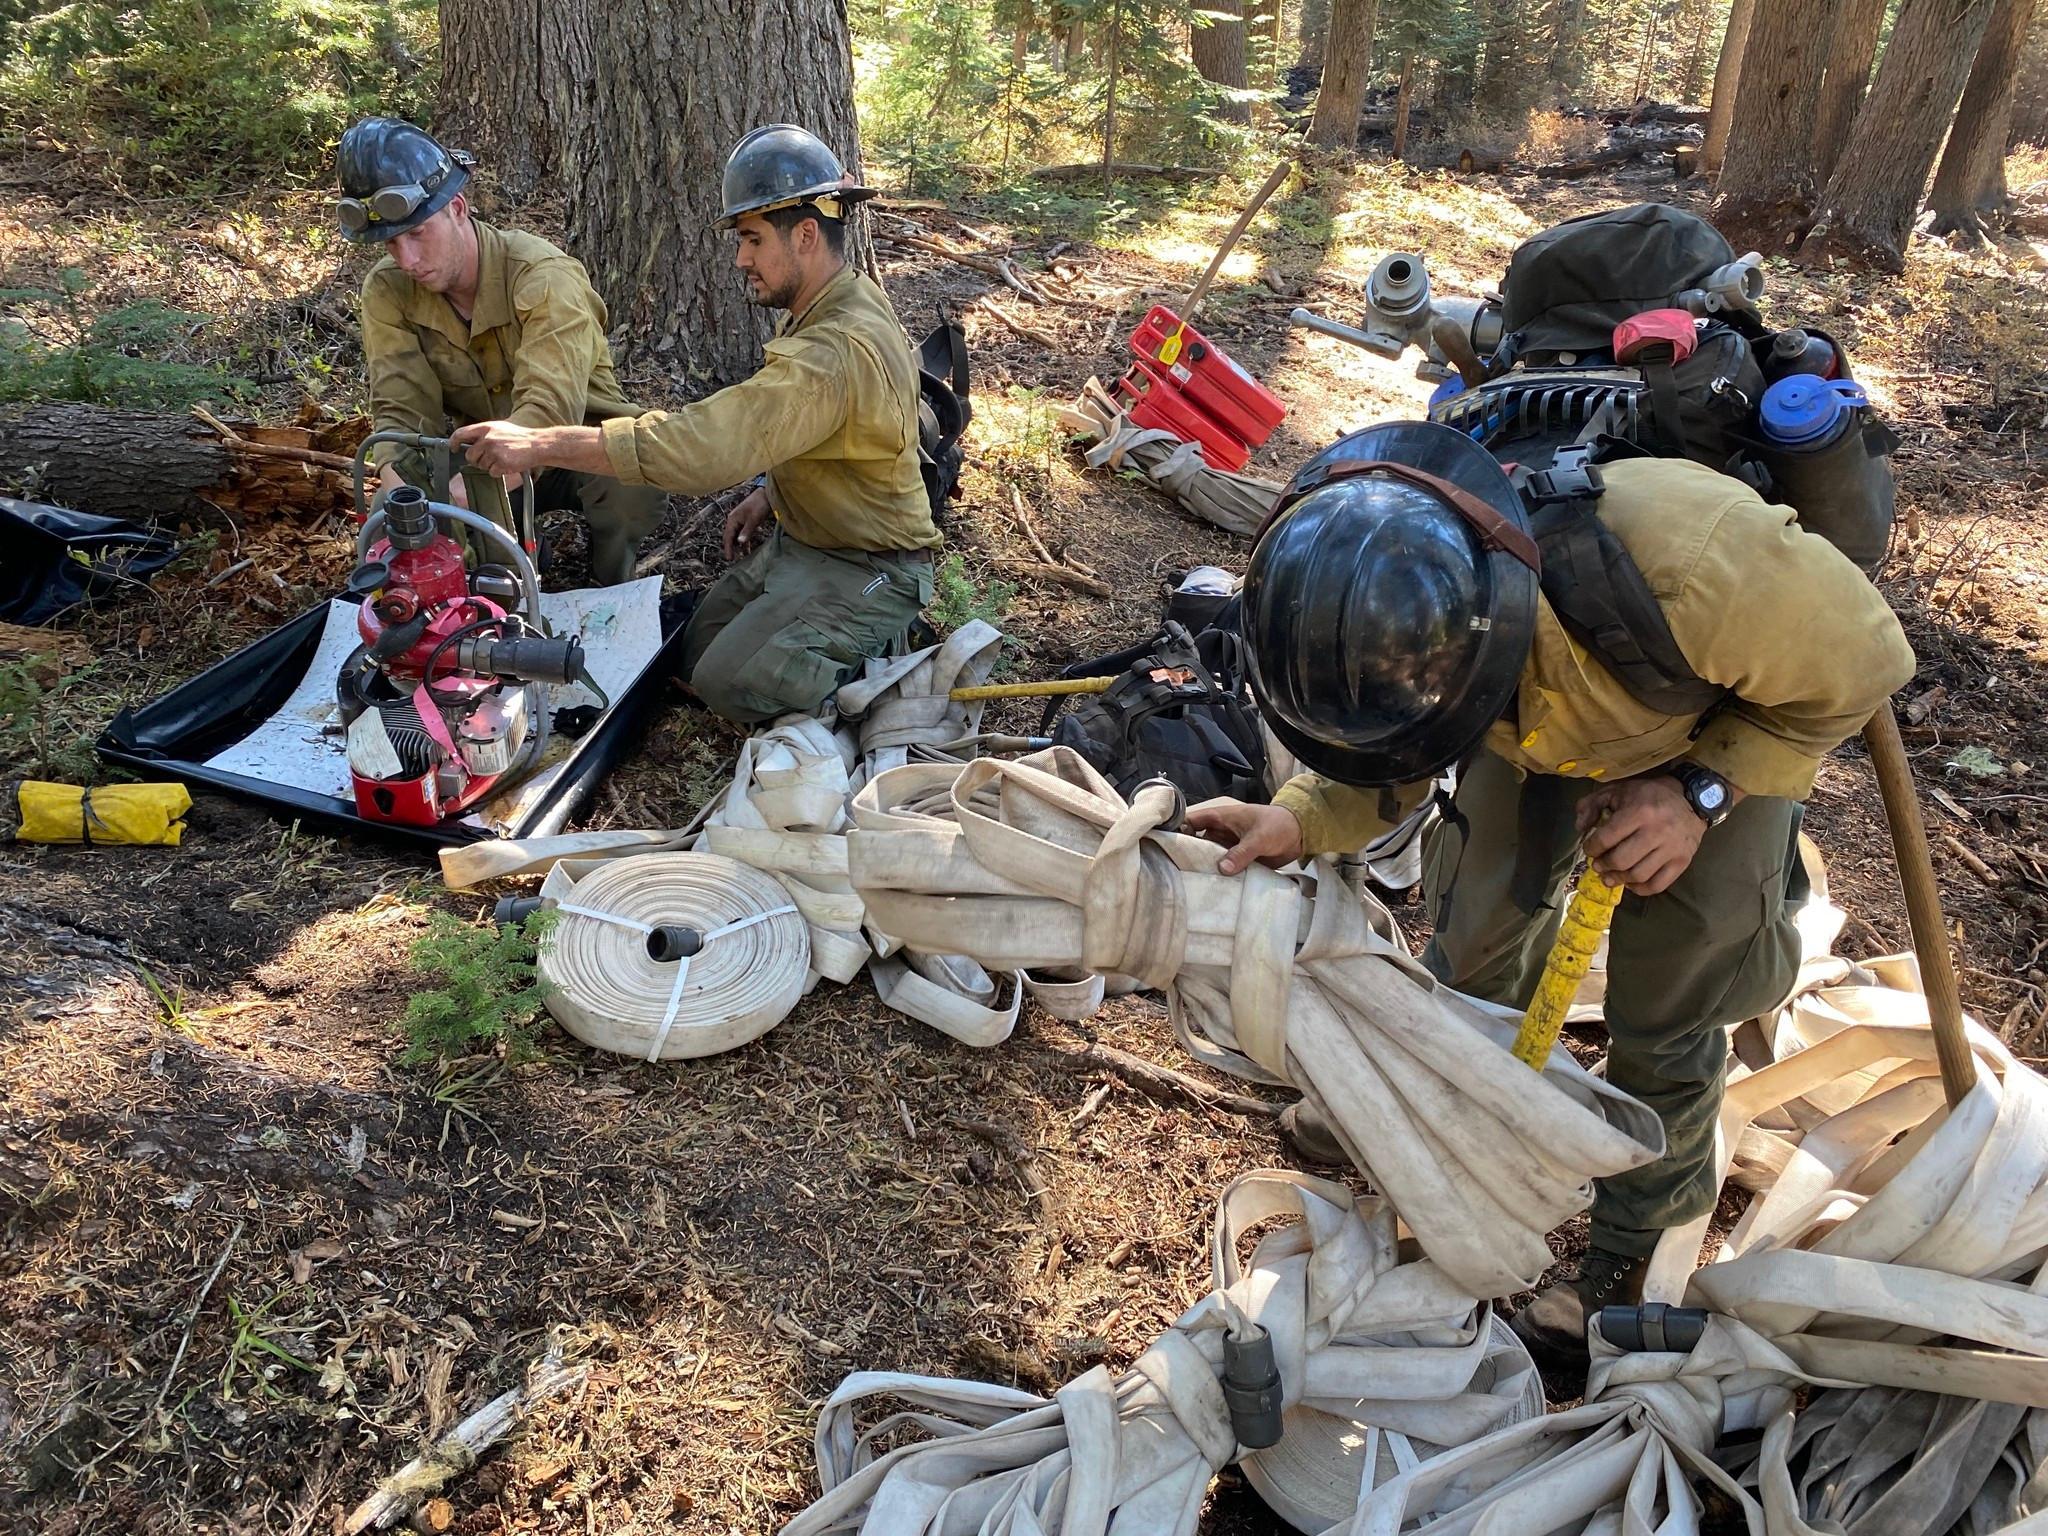 Three firefighters in black hardhats, yellow shirts, and green pants cleaning up equipment in the equipment. Equipment includes a red a silver metal pump use for water and numerous loops of white fire hose.